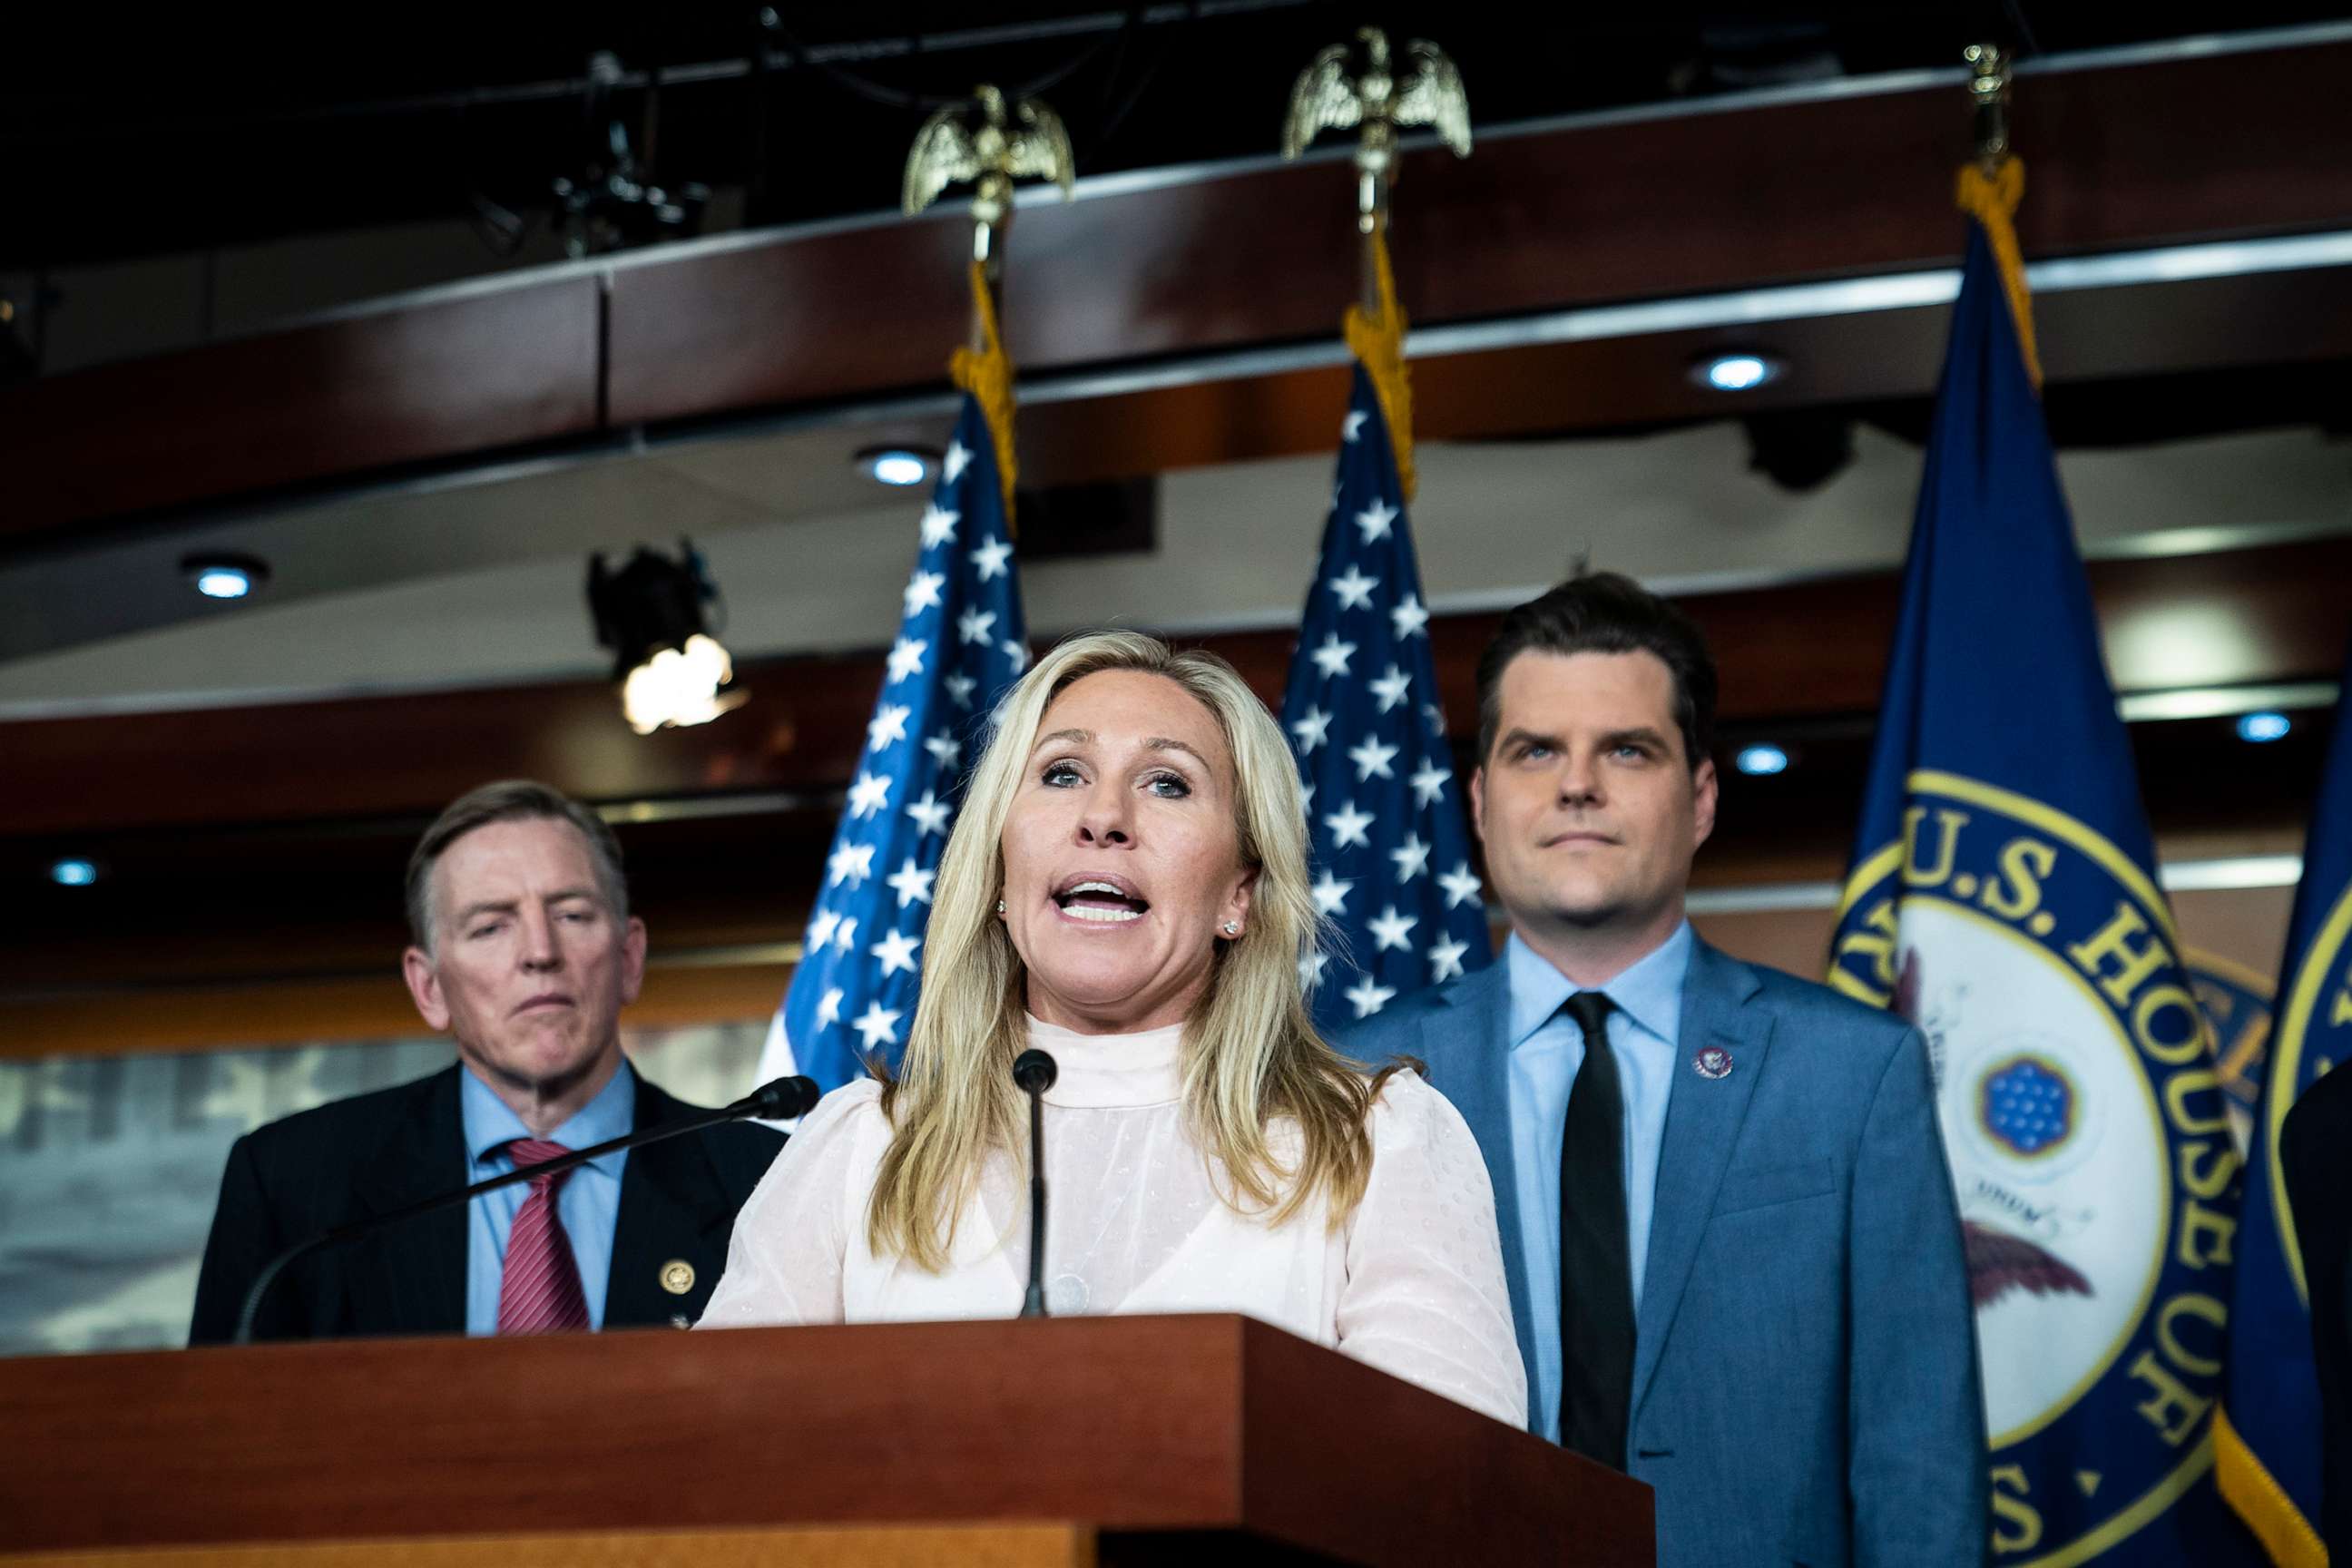 PHOTO: In this Dec. 7, 2021 file photo Rep. Marjorie Taylor Greene, joined by Rep. Paul Gosar, and Rep. Matt Gaetz, speak during a press conference on Capitol Hill in Washington, D.C.